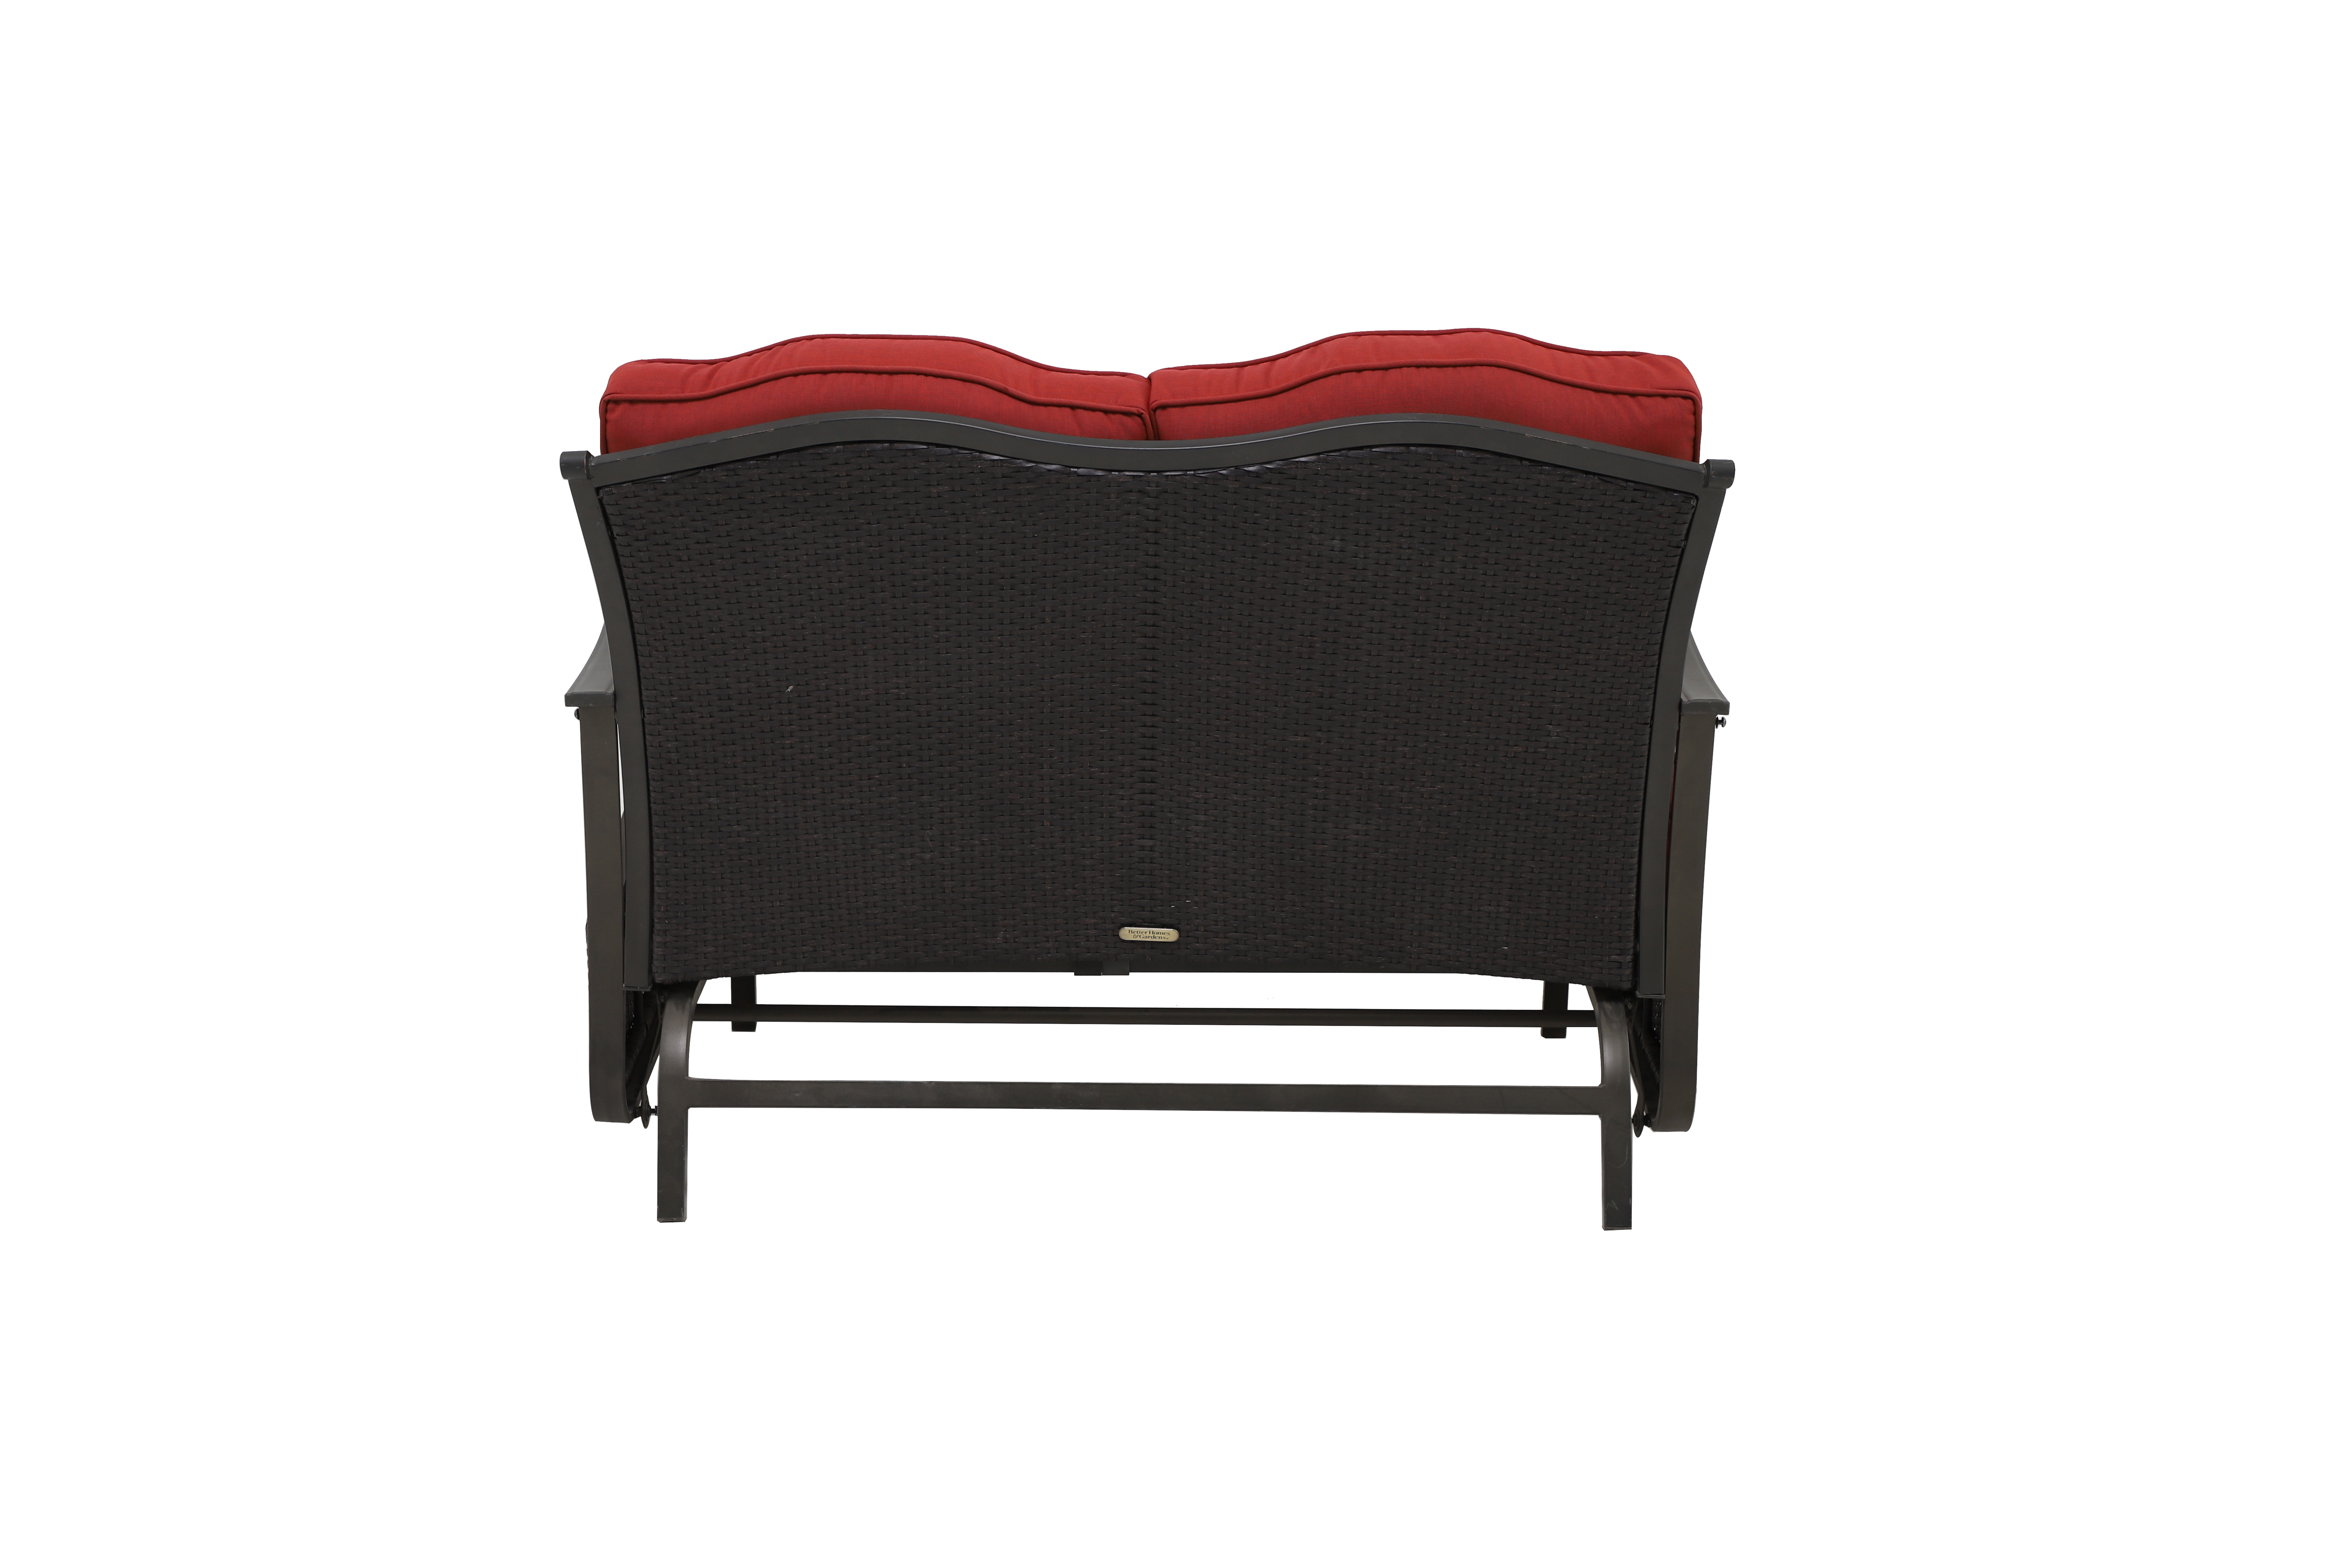 Better Homes & Gardens Providence Steel Outdoor Glider Loveseat - Red - image 4 of 6